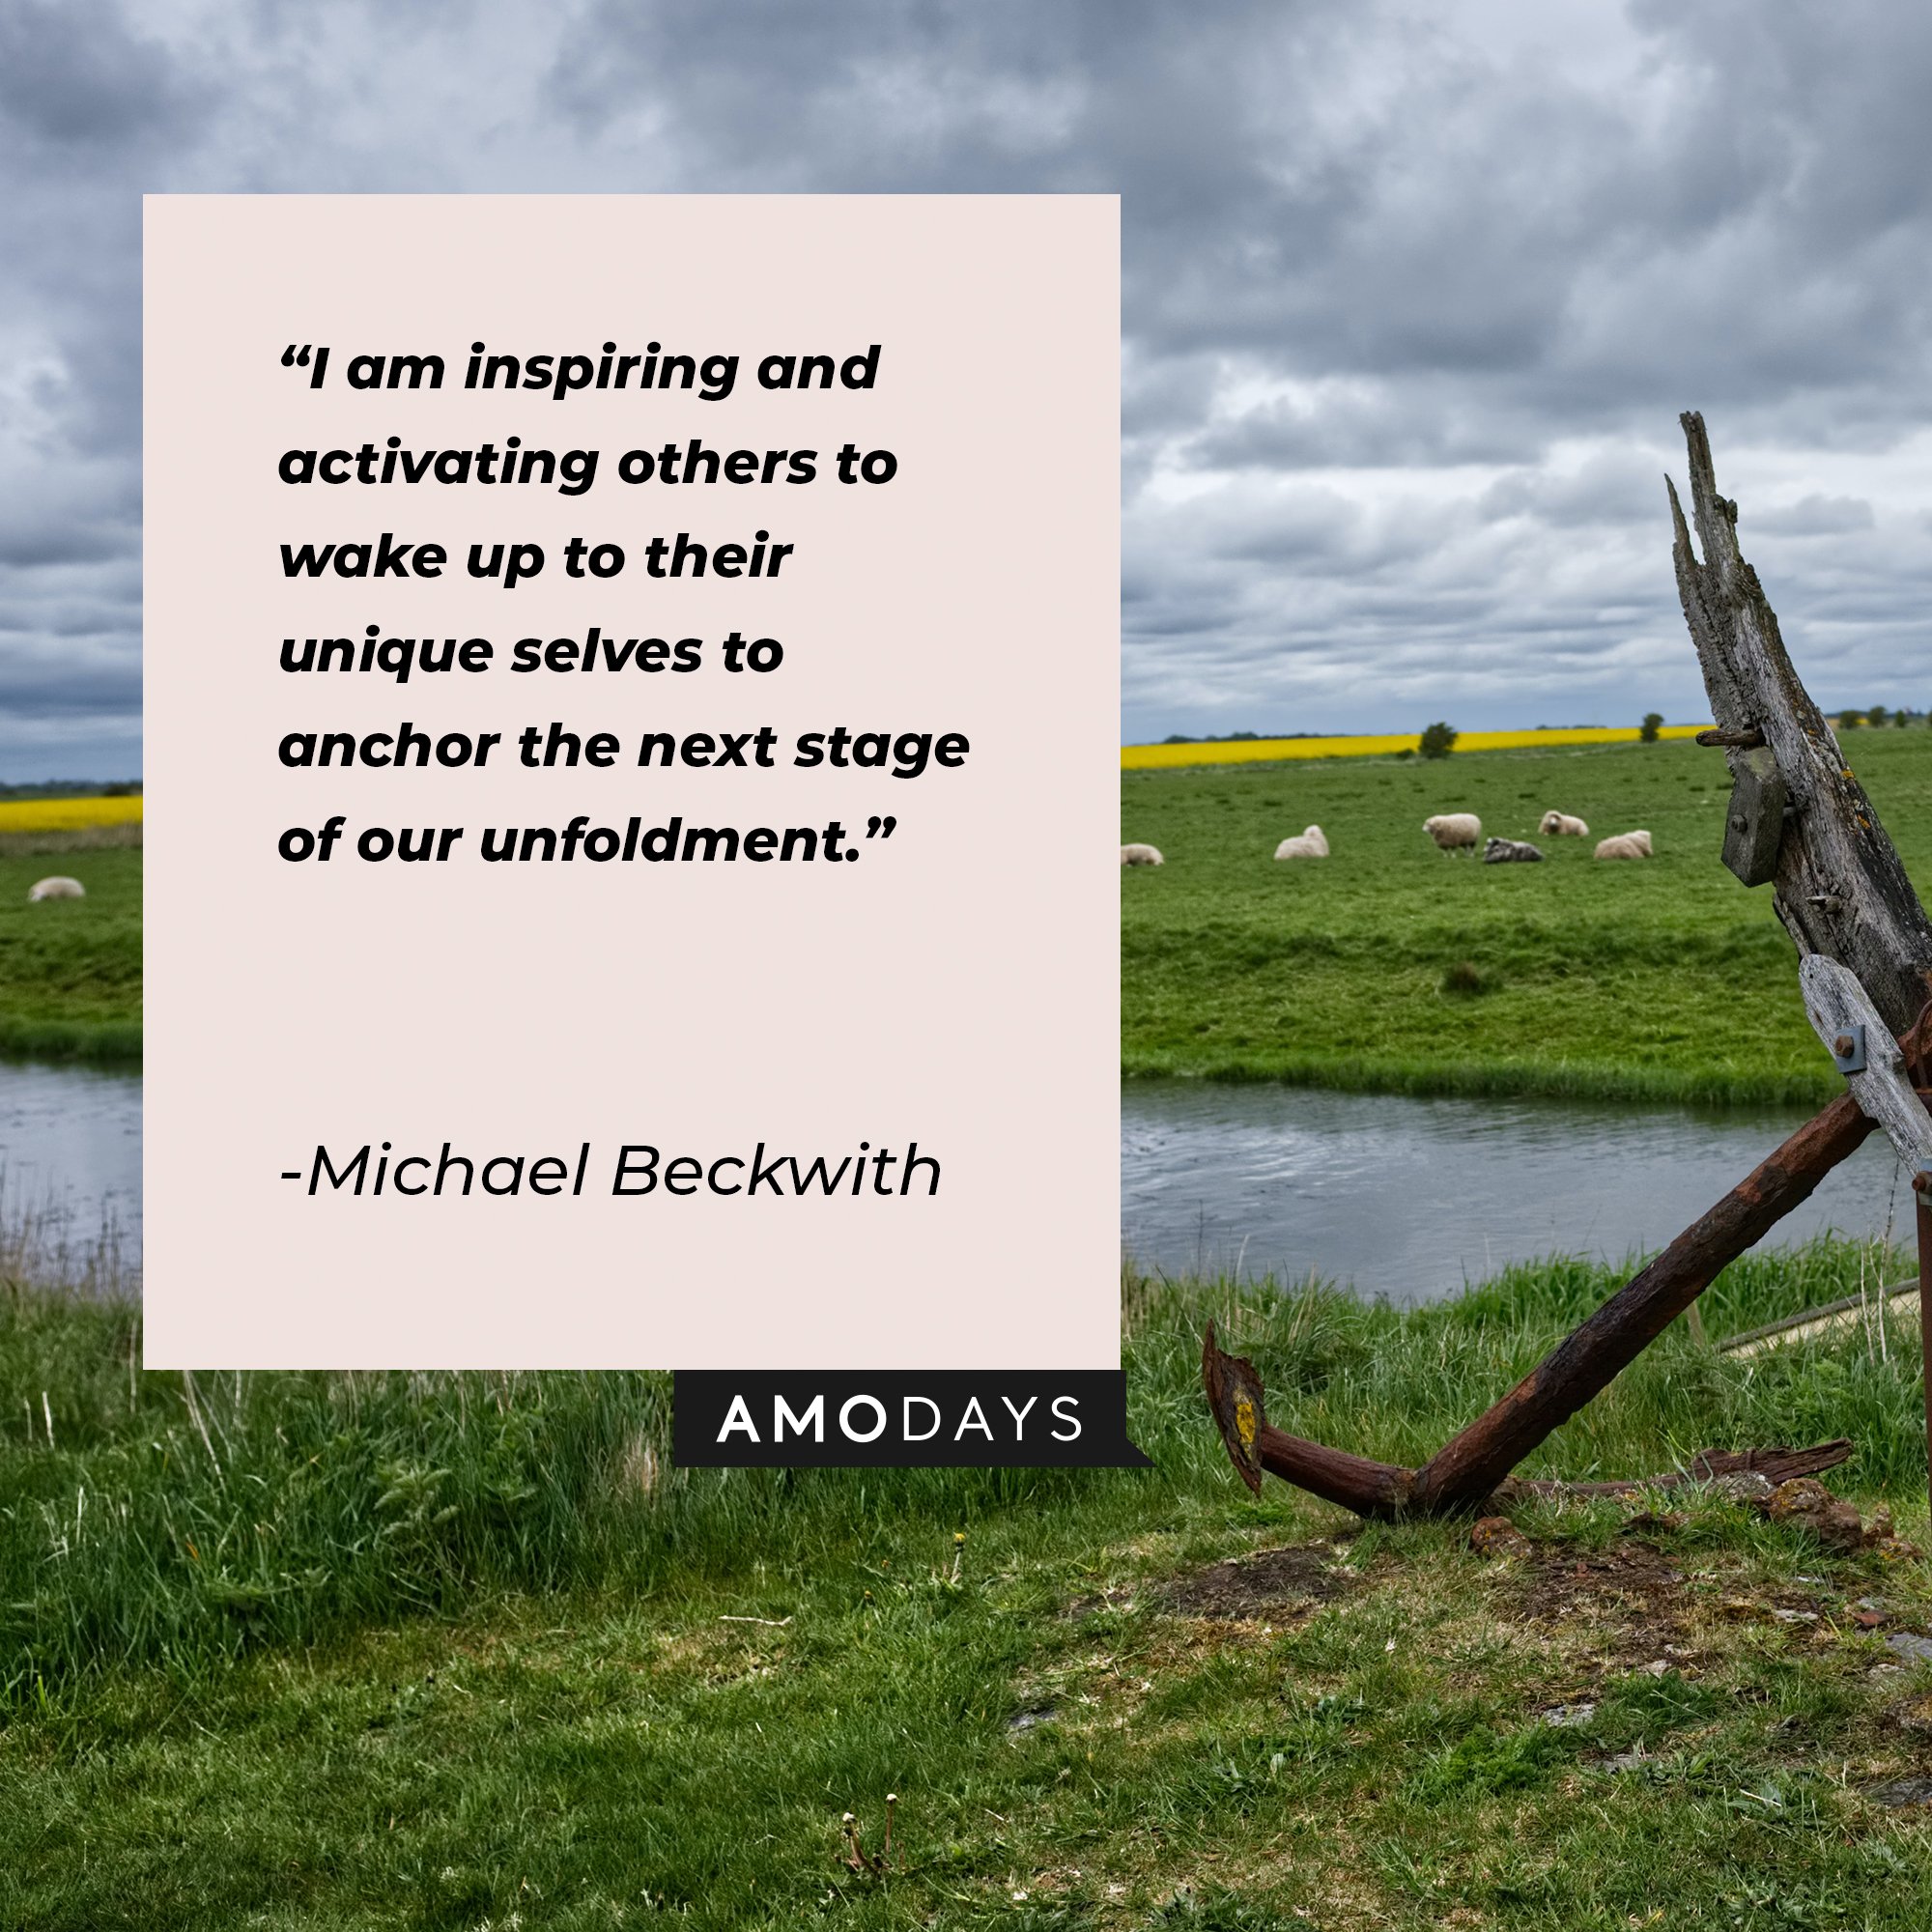 Michael Beckwith's quote: "I am inspiring and activating others to wake up to their unique selves to anchor the next stage of our unfoldment." | Image: AmoDays